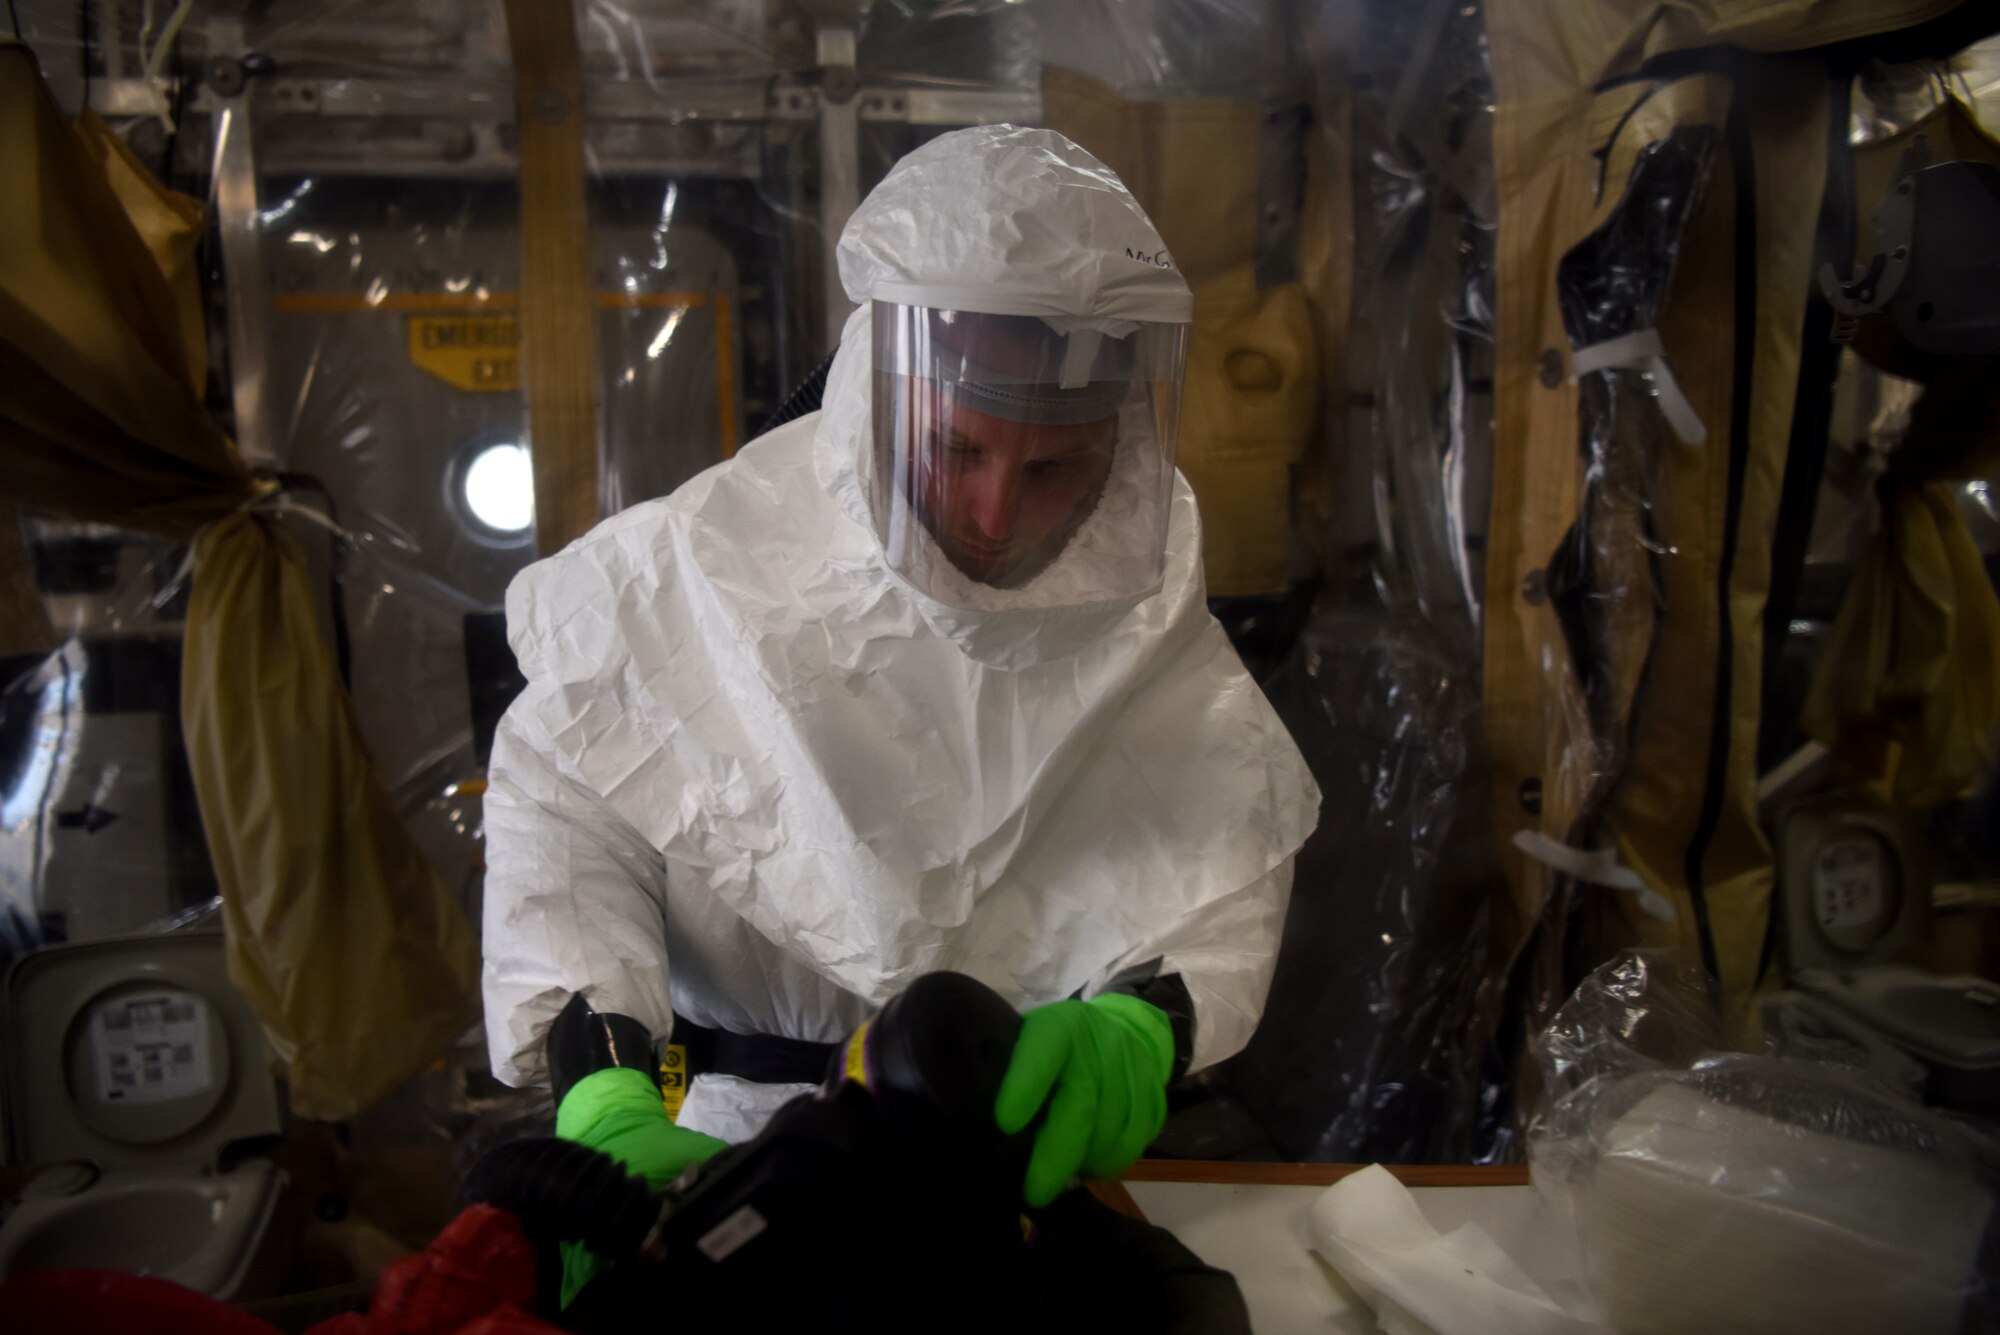 U.S. Air Force Senior Airman Jason McGhee, 313th Expeditionary Operations Support Squadron biomedical equipment technician, sanitizes a purified air respirator during the decontamination of a Transport Isolation System on a U.S. Air Force C-17 Globemaster III aircraft.